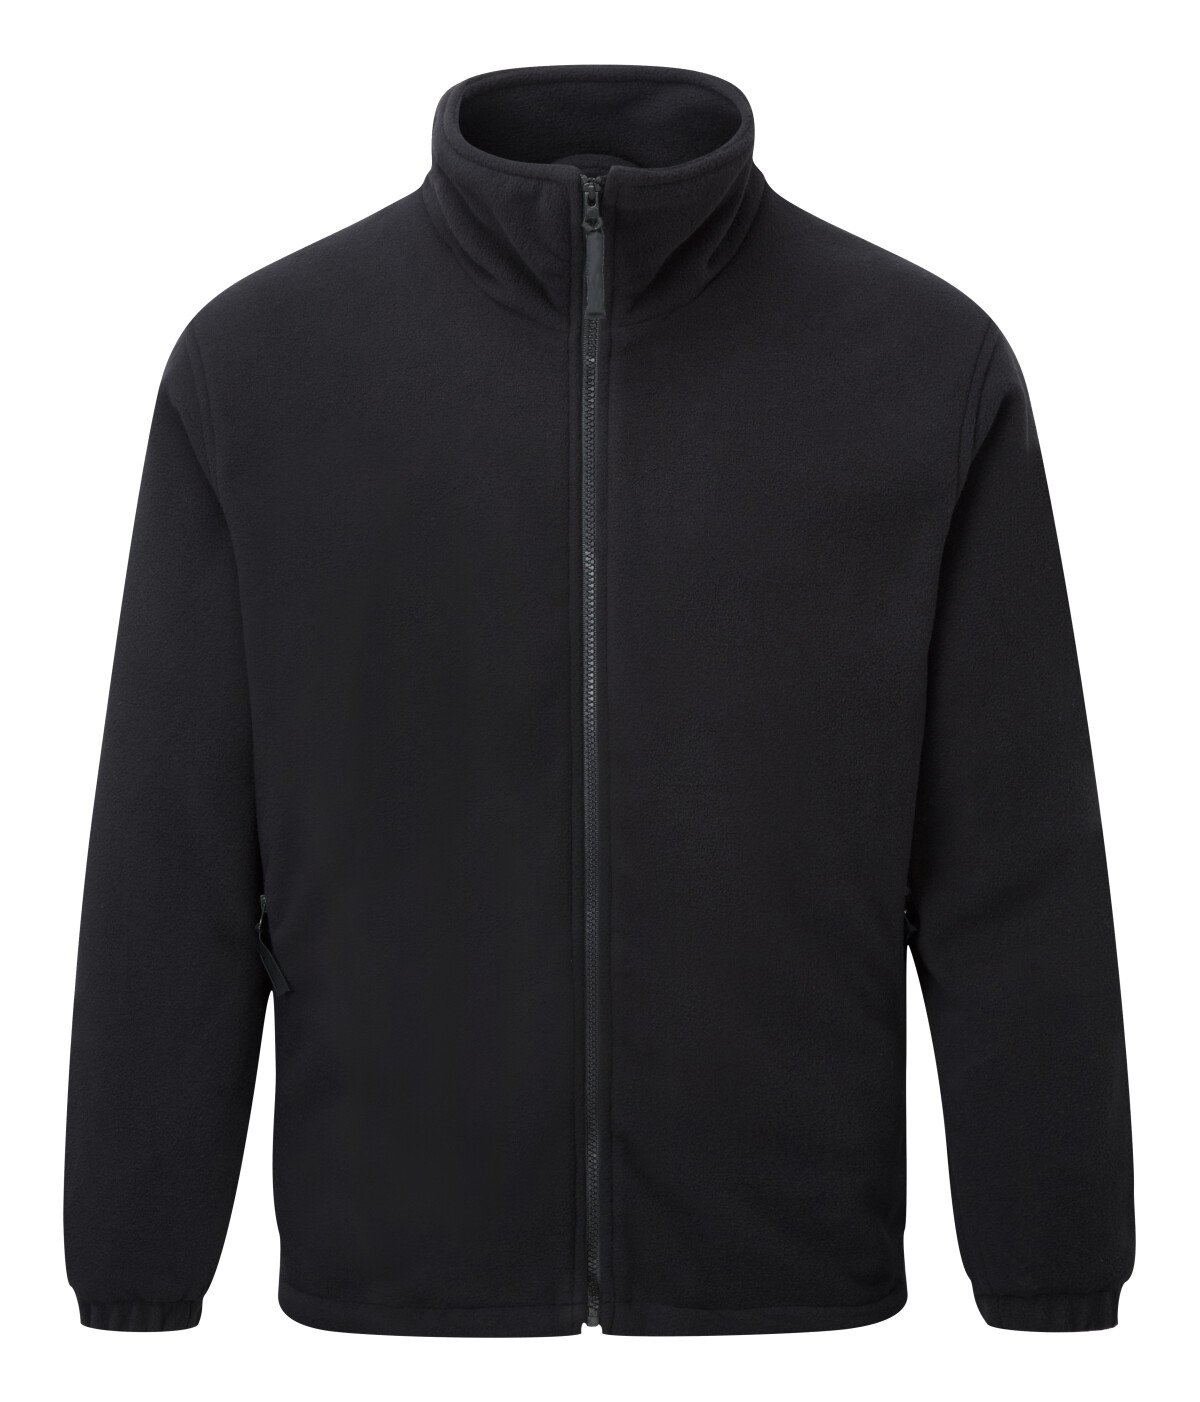 Fort 207 Lomond Fleece Jacket from Lawson HIS